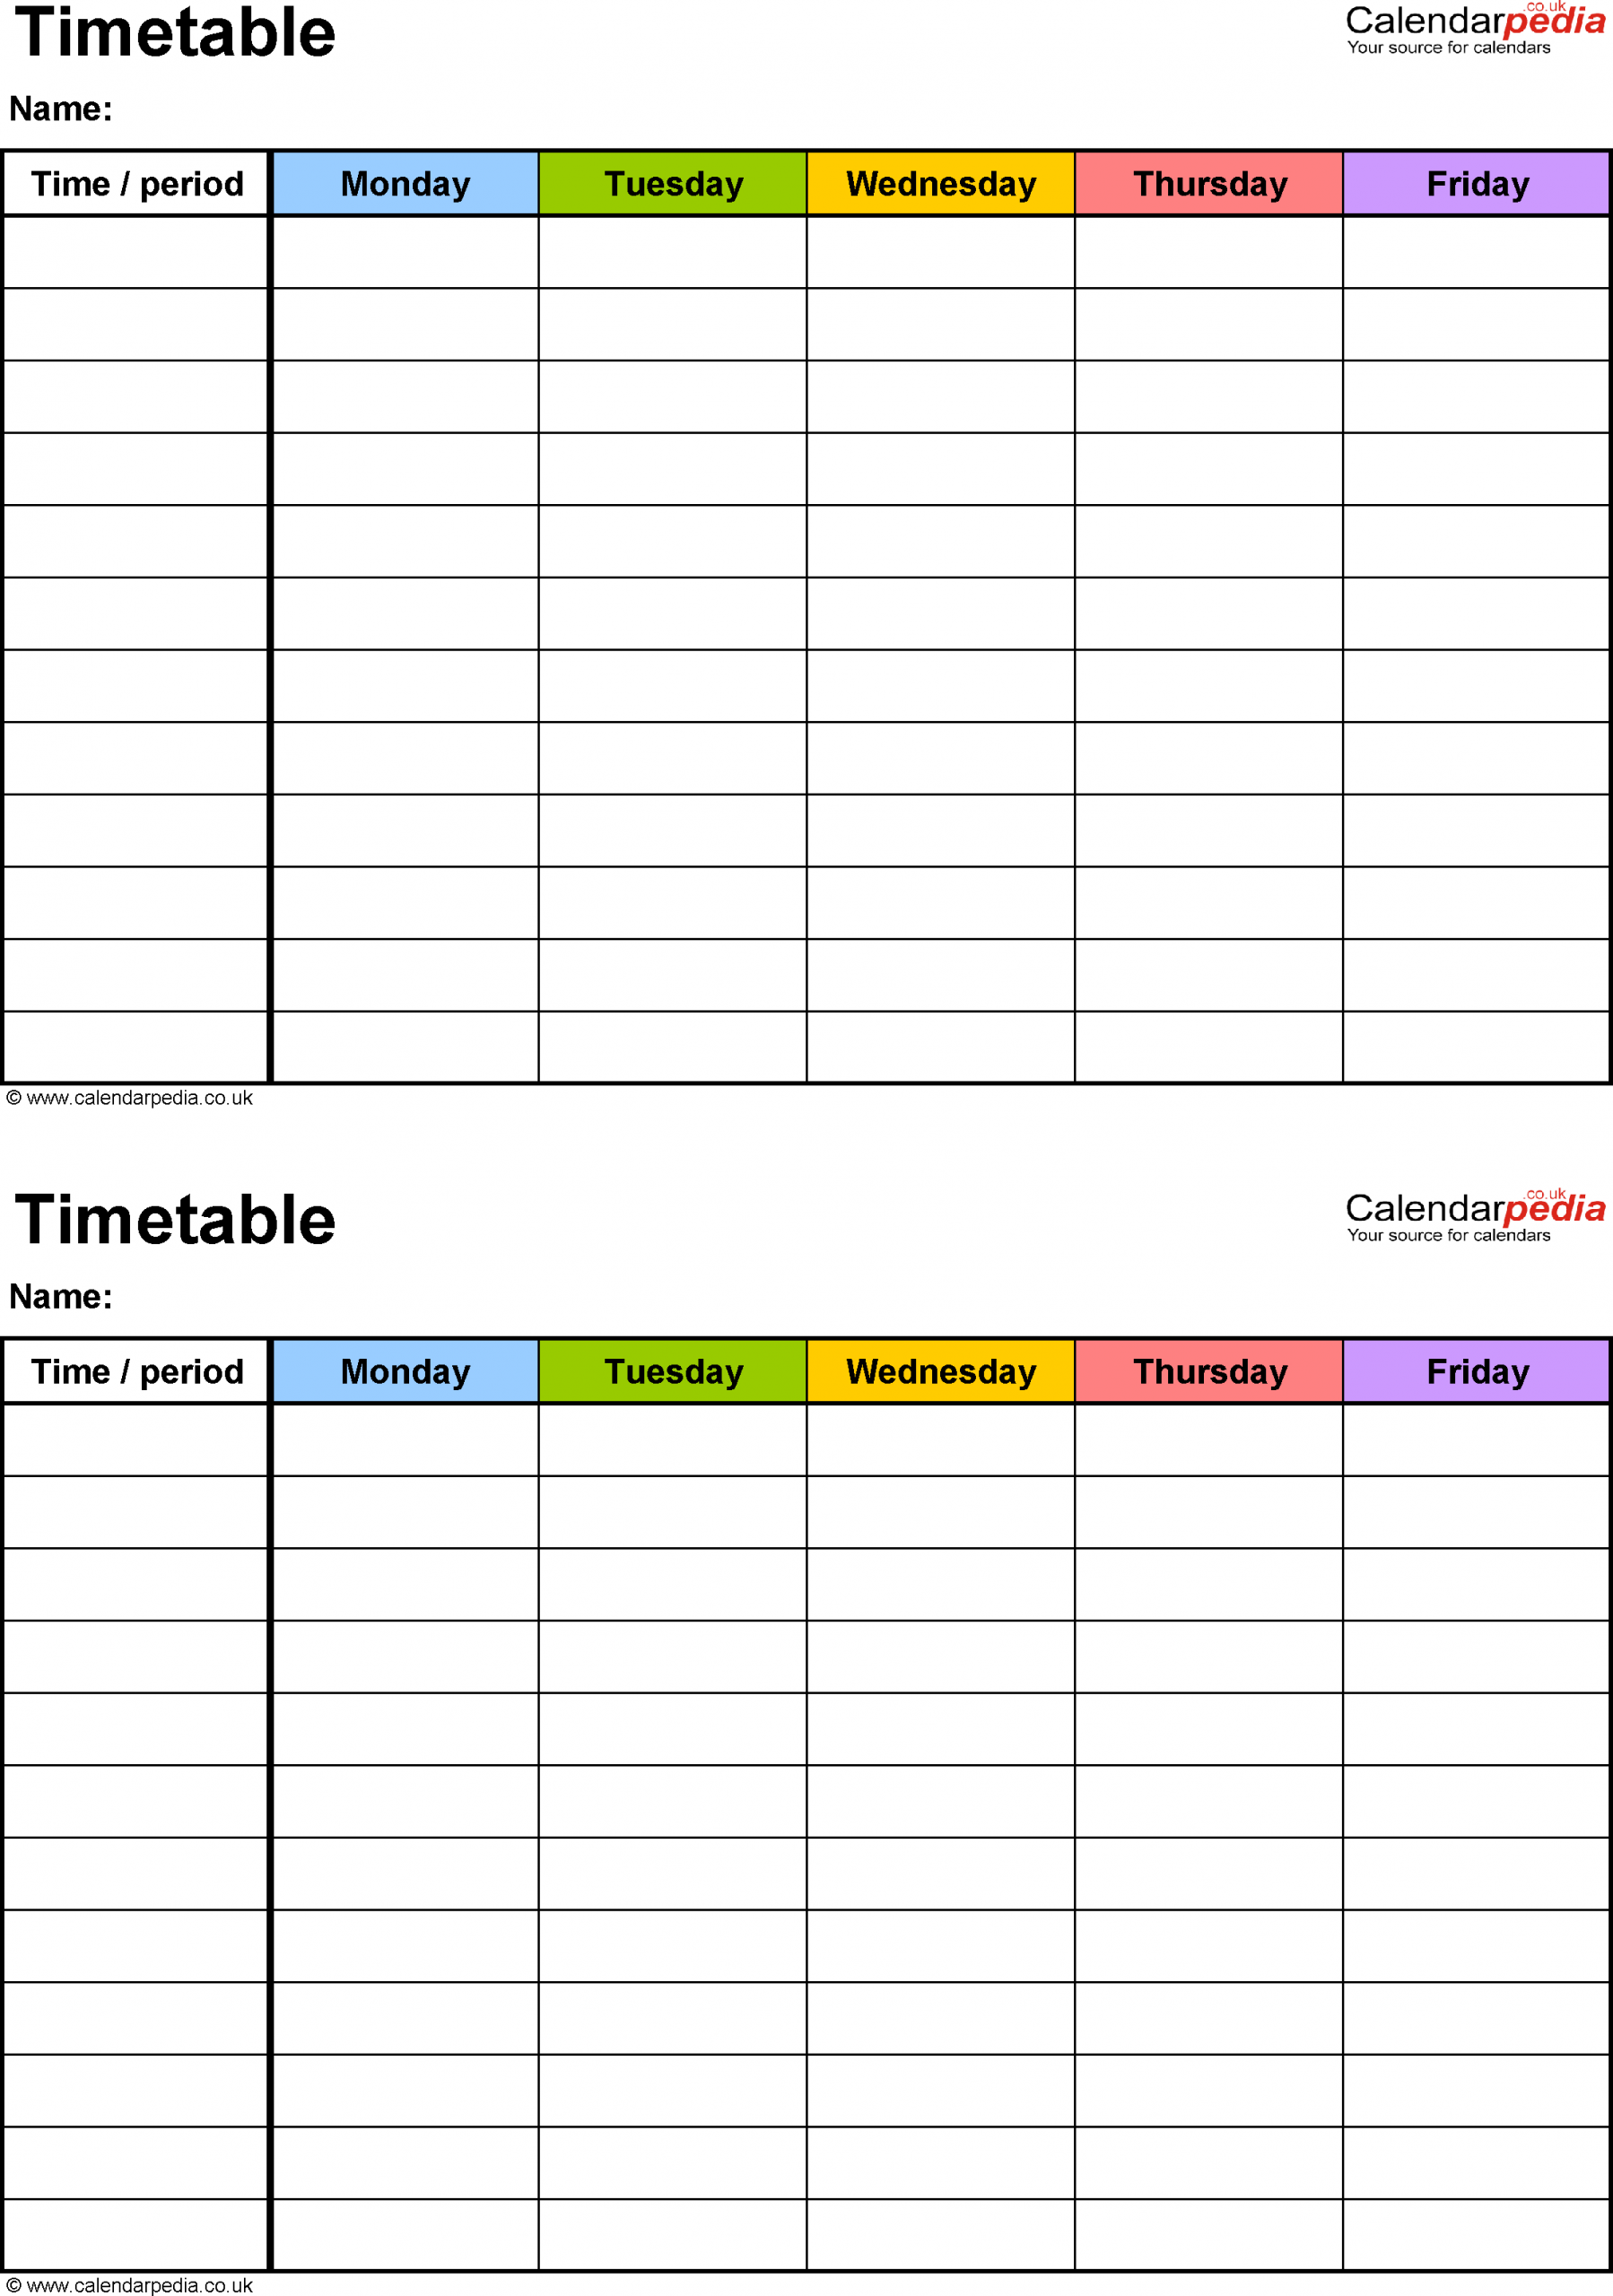 Excel Timetable Template 6 2 A5 Timetables On One Page